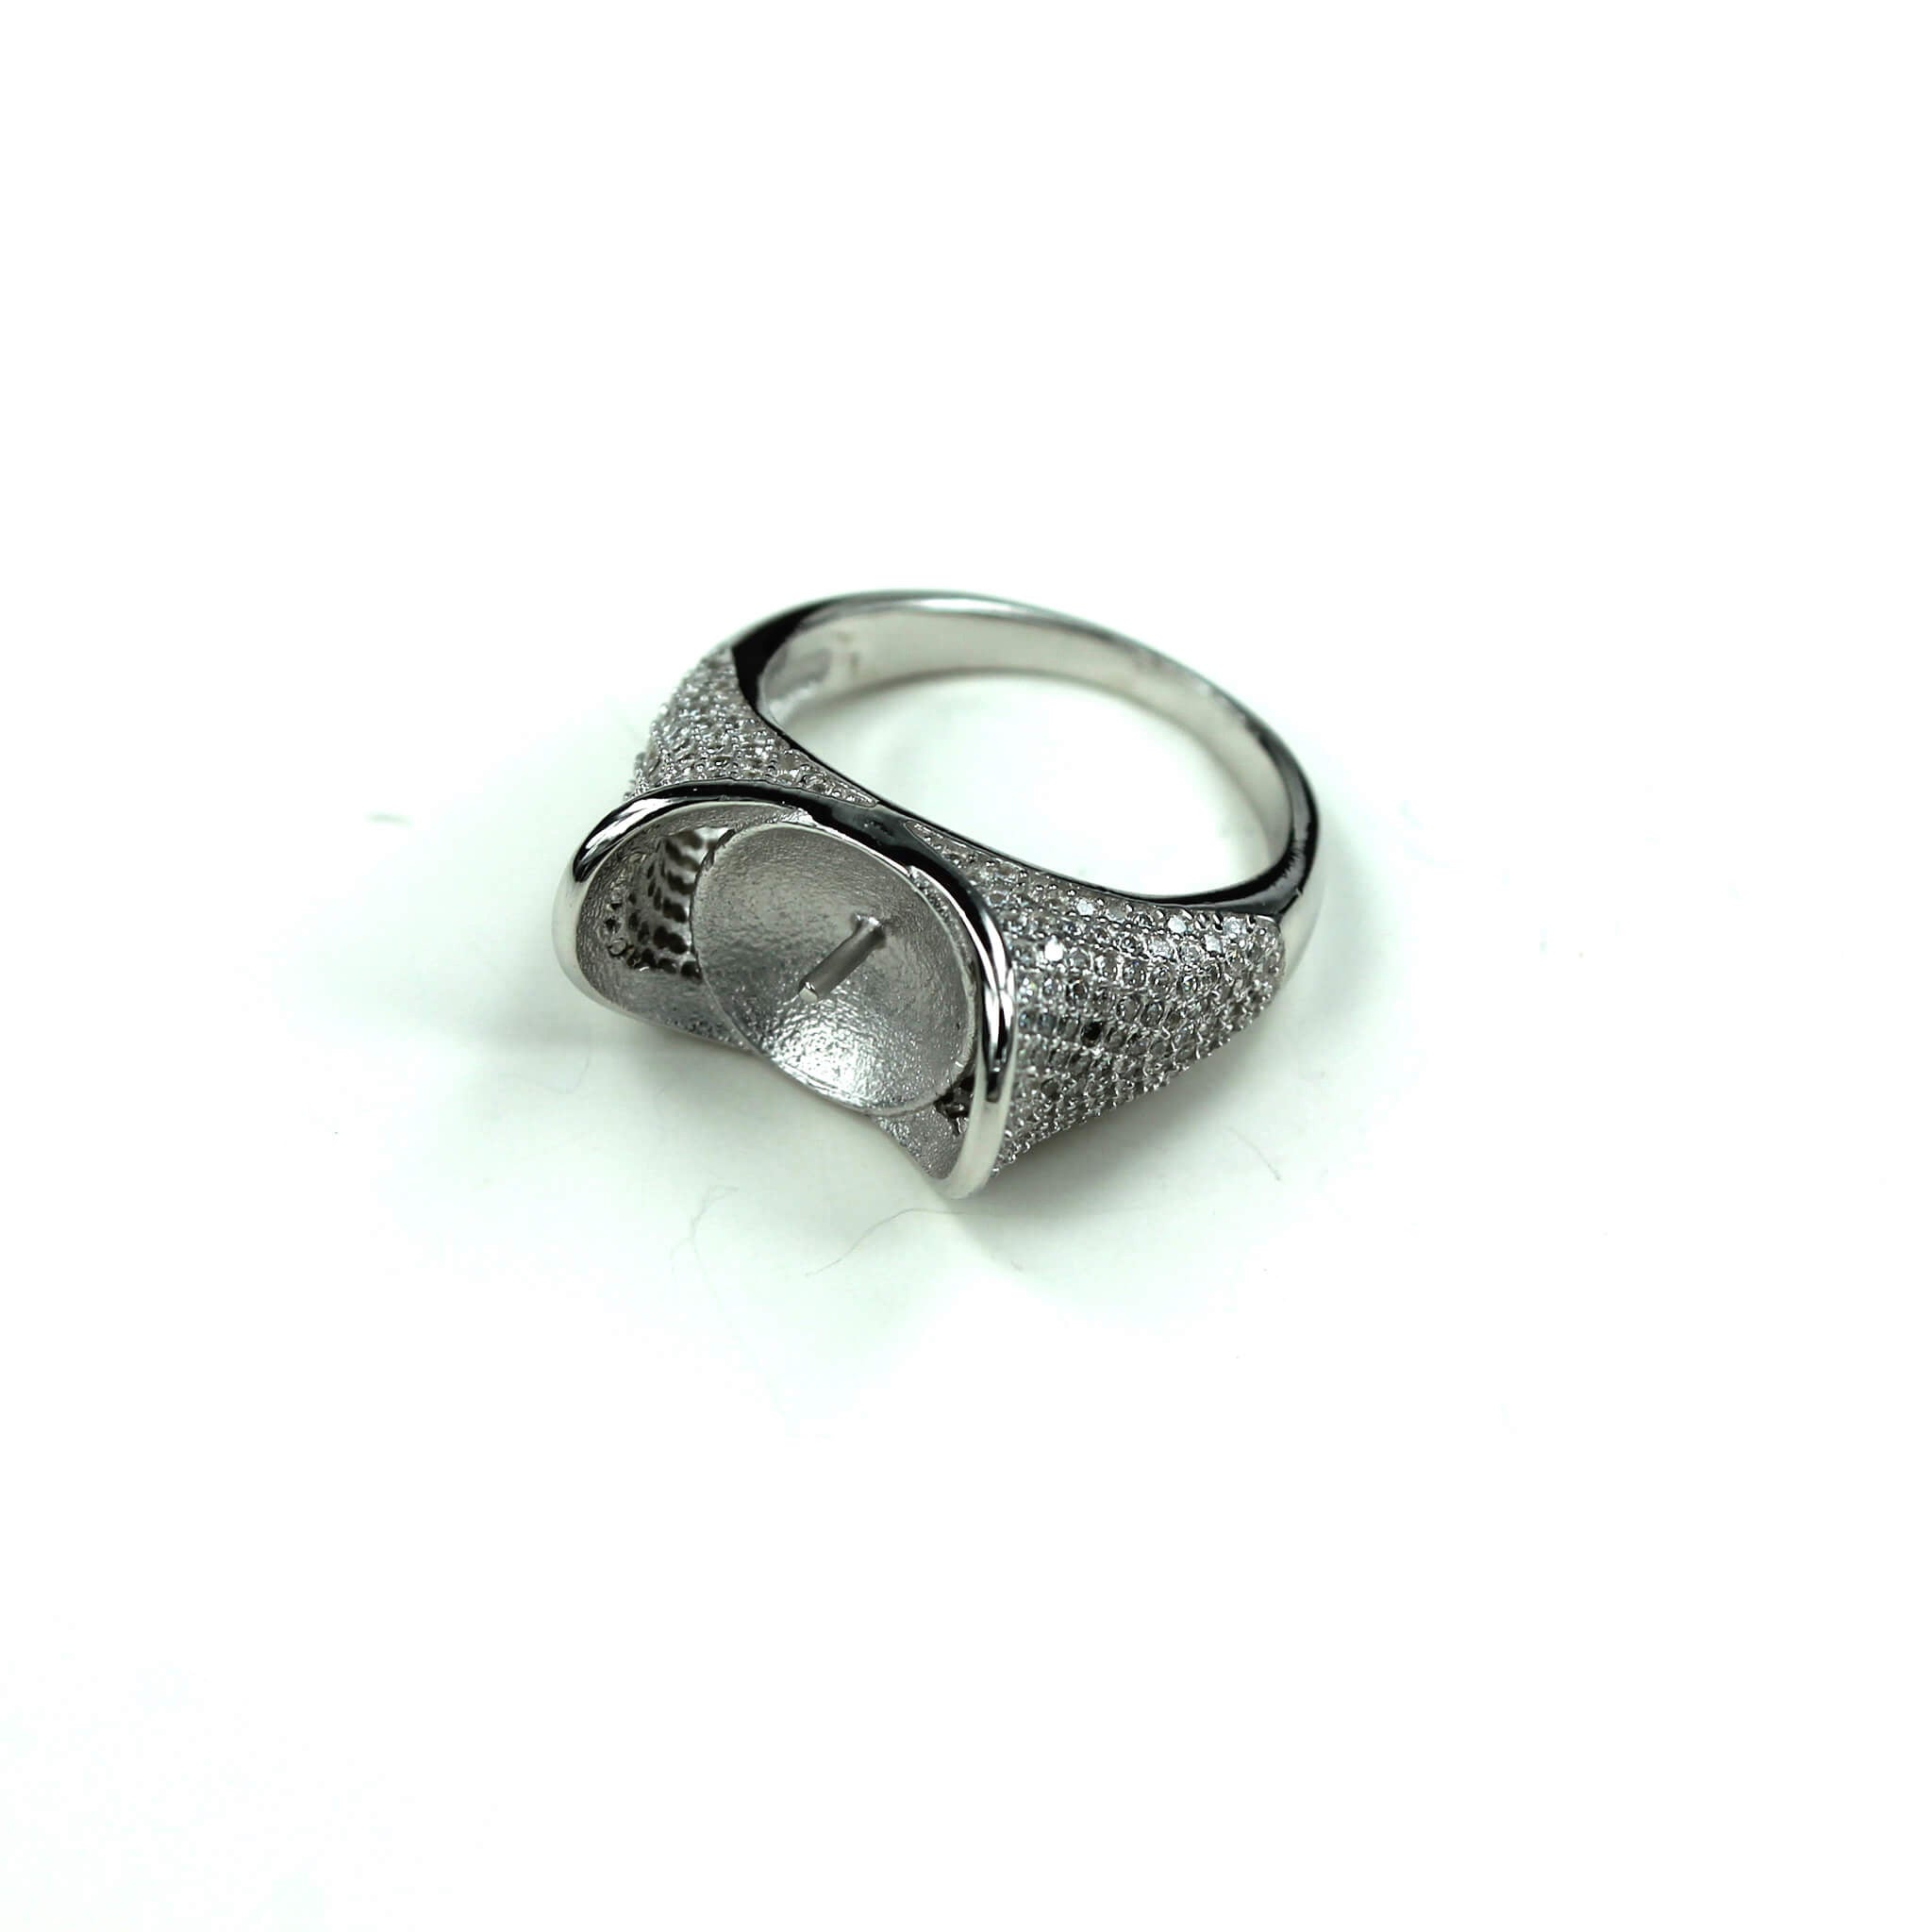 Ring with Cubic Zirconia Inlays and Cup and Peg Mounting in Sterling Silver 10mm